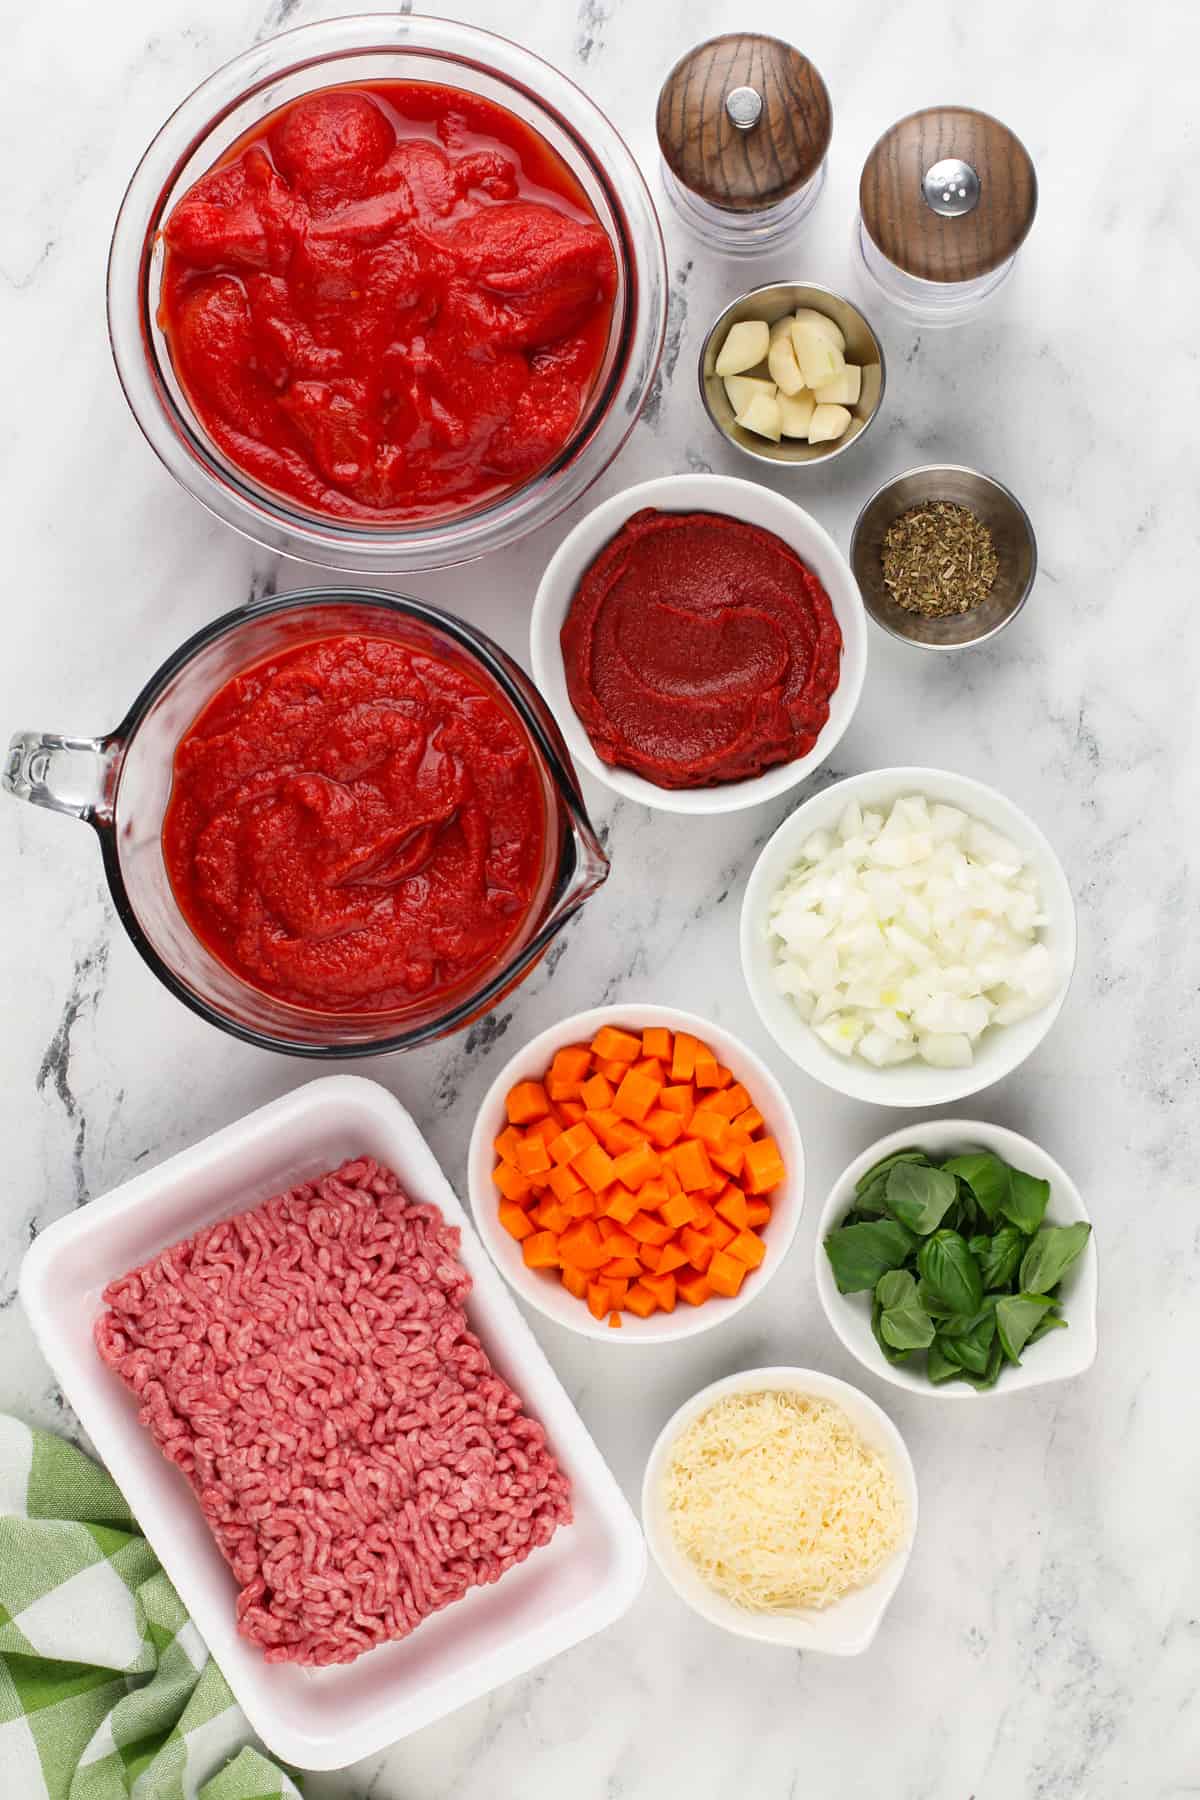 Ingredients for crockpot spaghetti sauce arranged on a marble countertop.